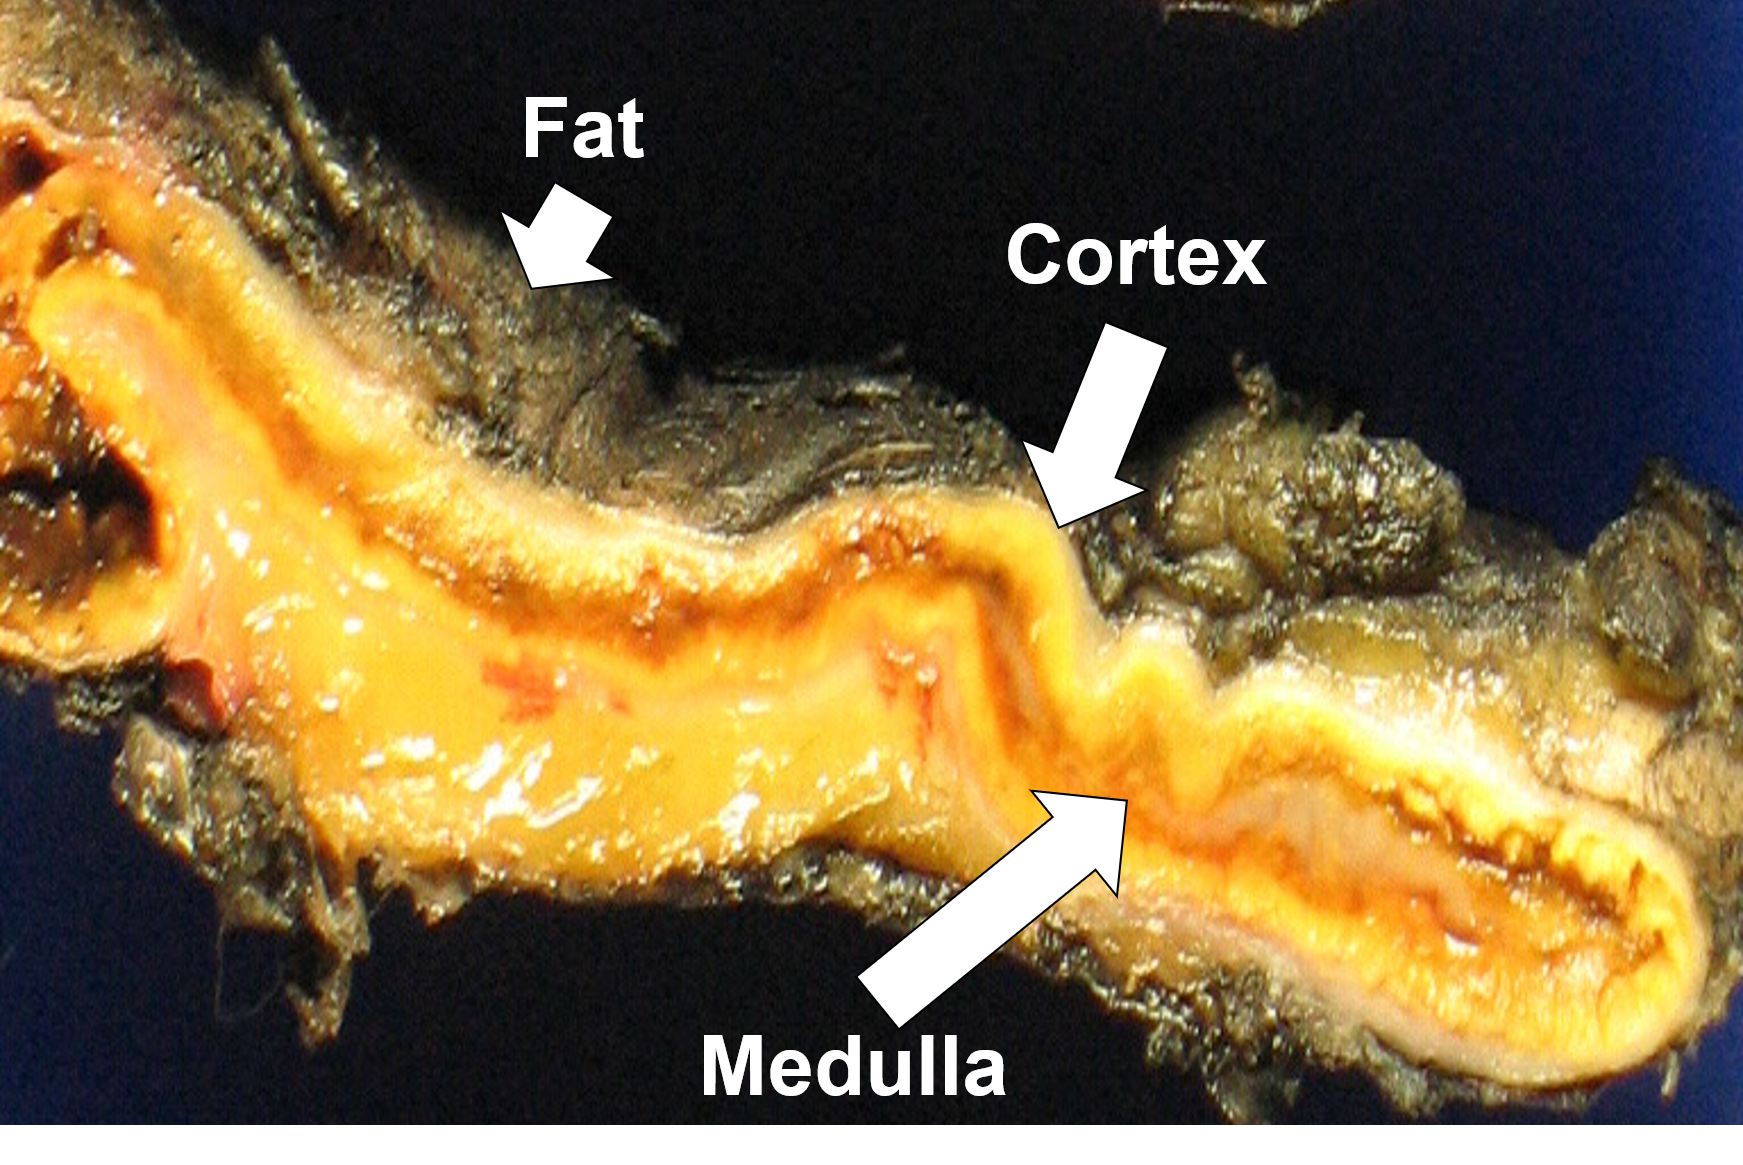 Transection of a portion of normal adrenal tissue displaying the adrenal cortex (yellow), medulla (brownish), and surrounding fat